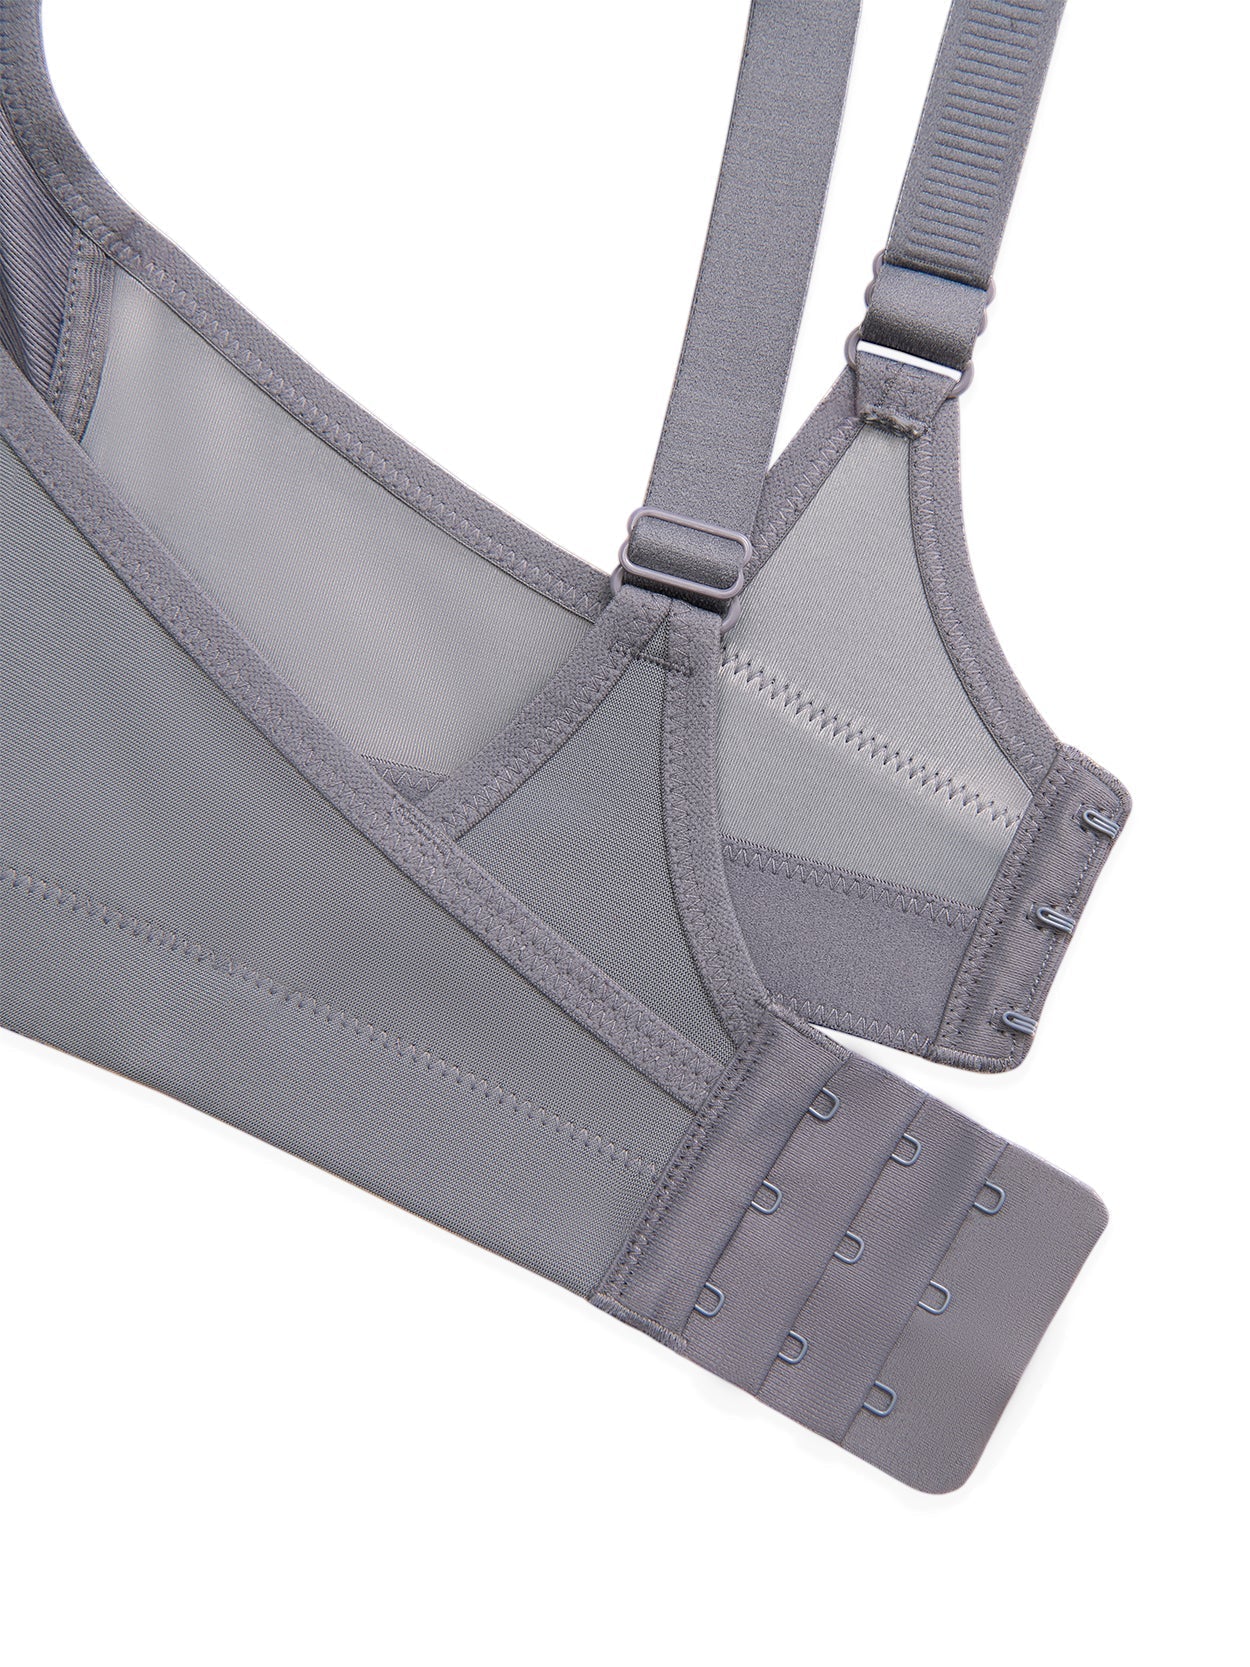  PRMDDP Sports Bra Womens High Impact Support Wirefree Plus Size  Non Padding Workout Yoga Fitness Bra (Color : Gray, Size : 36G) : Clothing,  Shoes & Jewelry